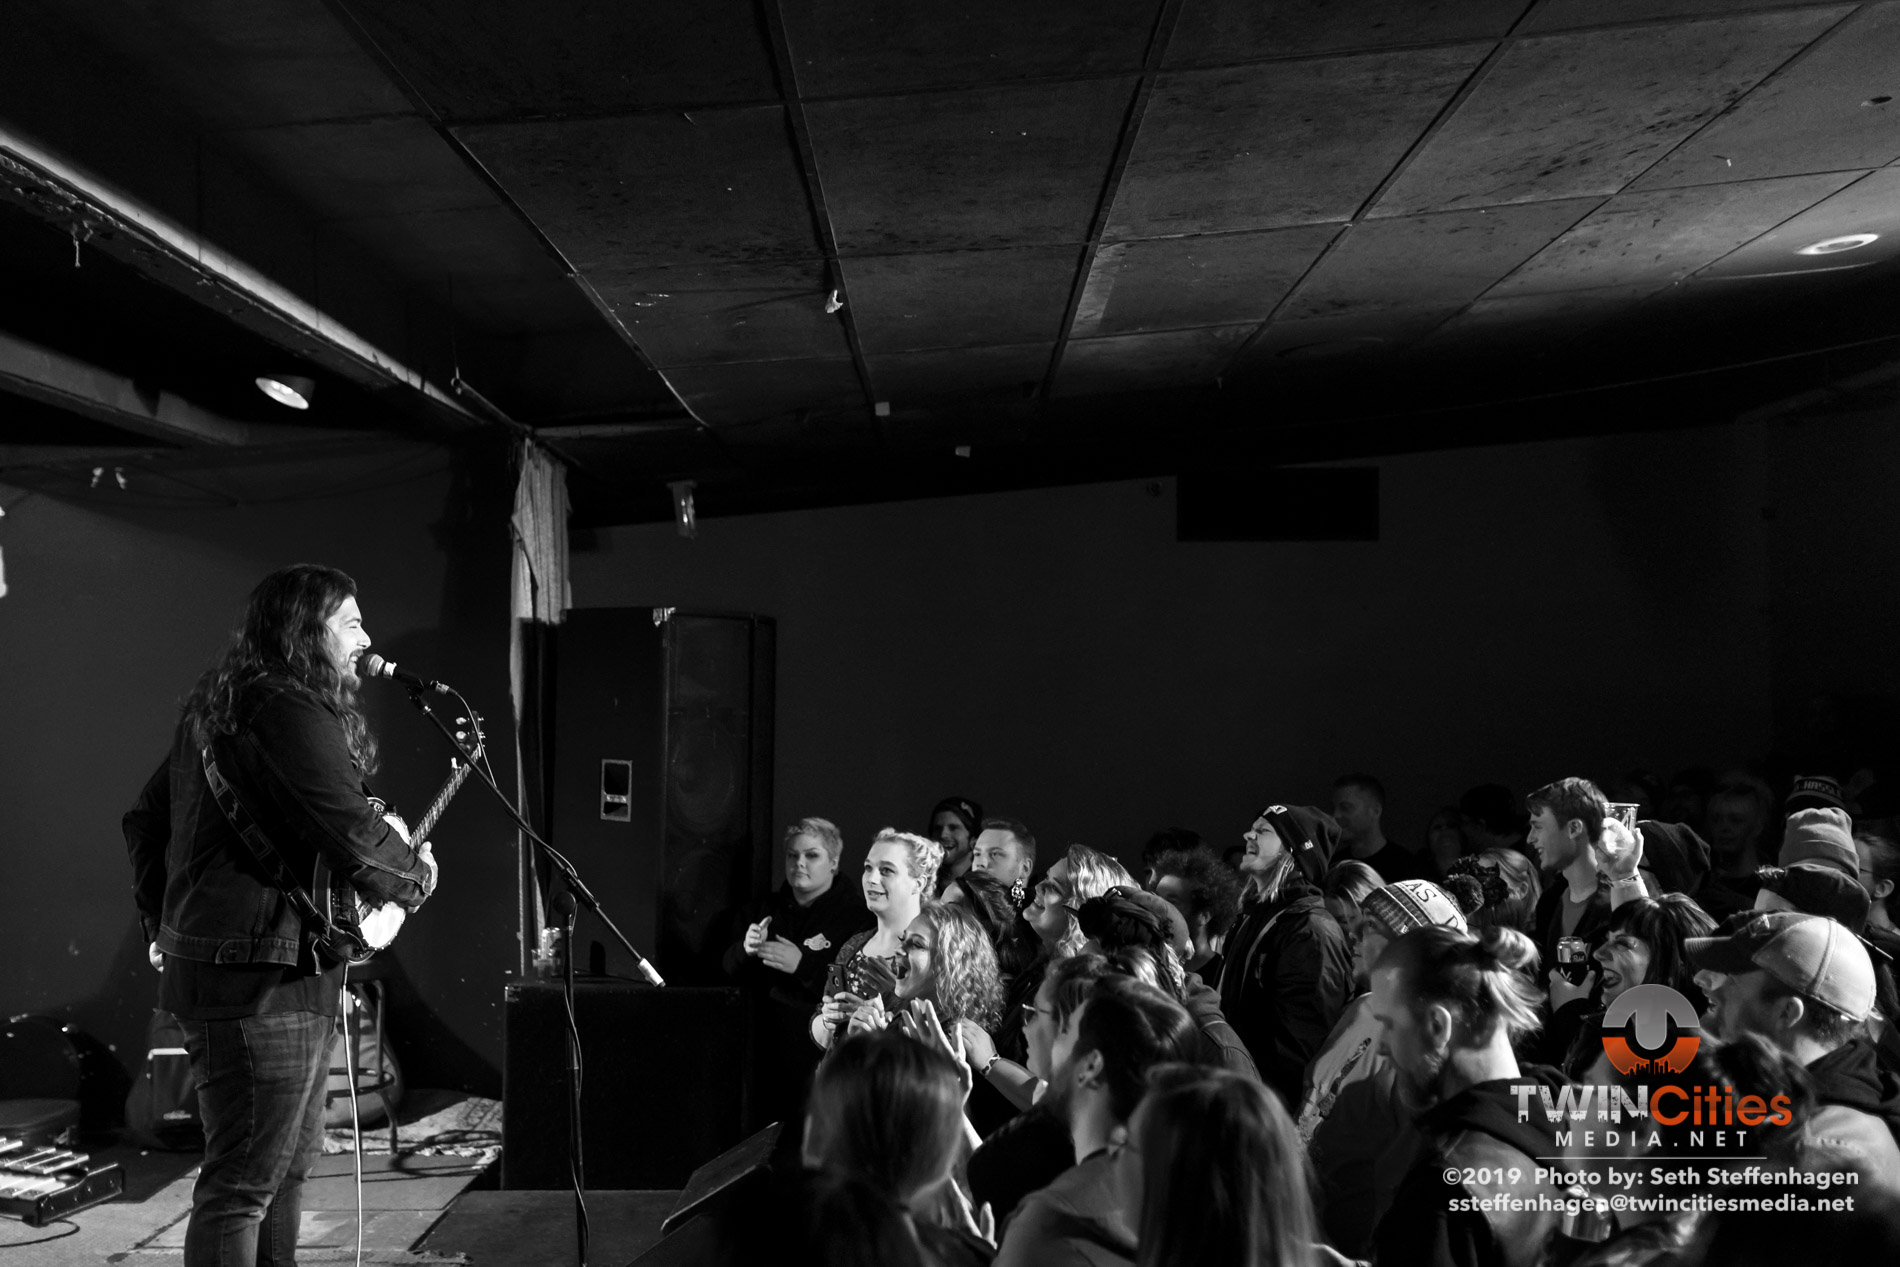 January 16, 2019 - Minneapolis, Minnesota, United States - Amigo The Devil live in concert at the Skyway Theatre, Studio B along with Harley Poe as the opener.

(Photo by Seth Steffenhagen/Steffenhagen Photography)